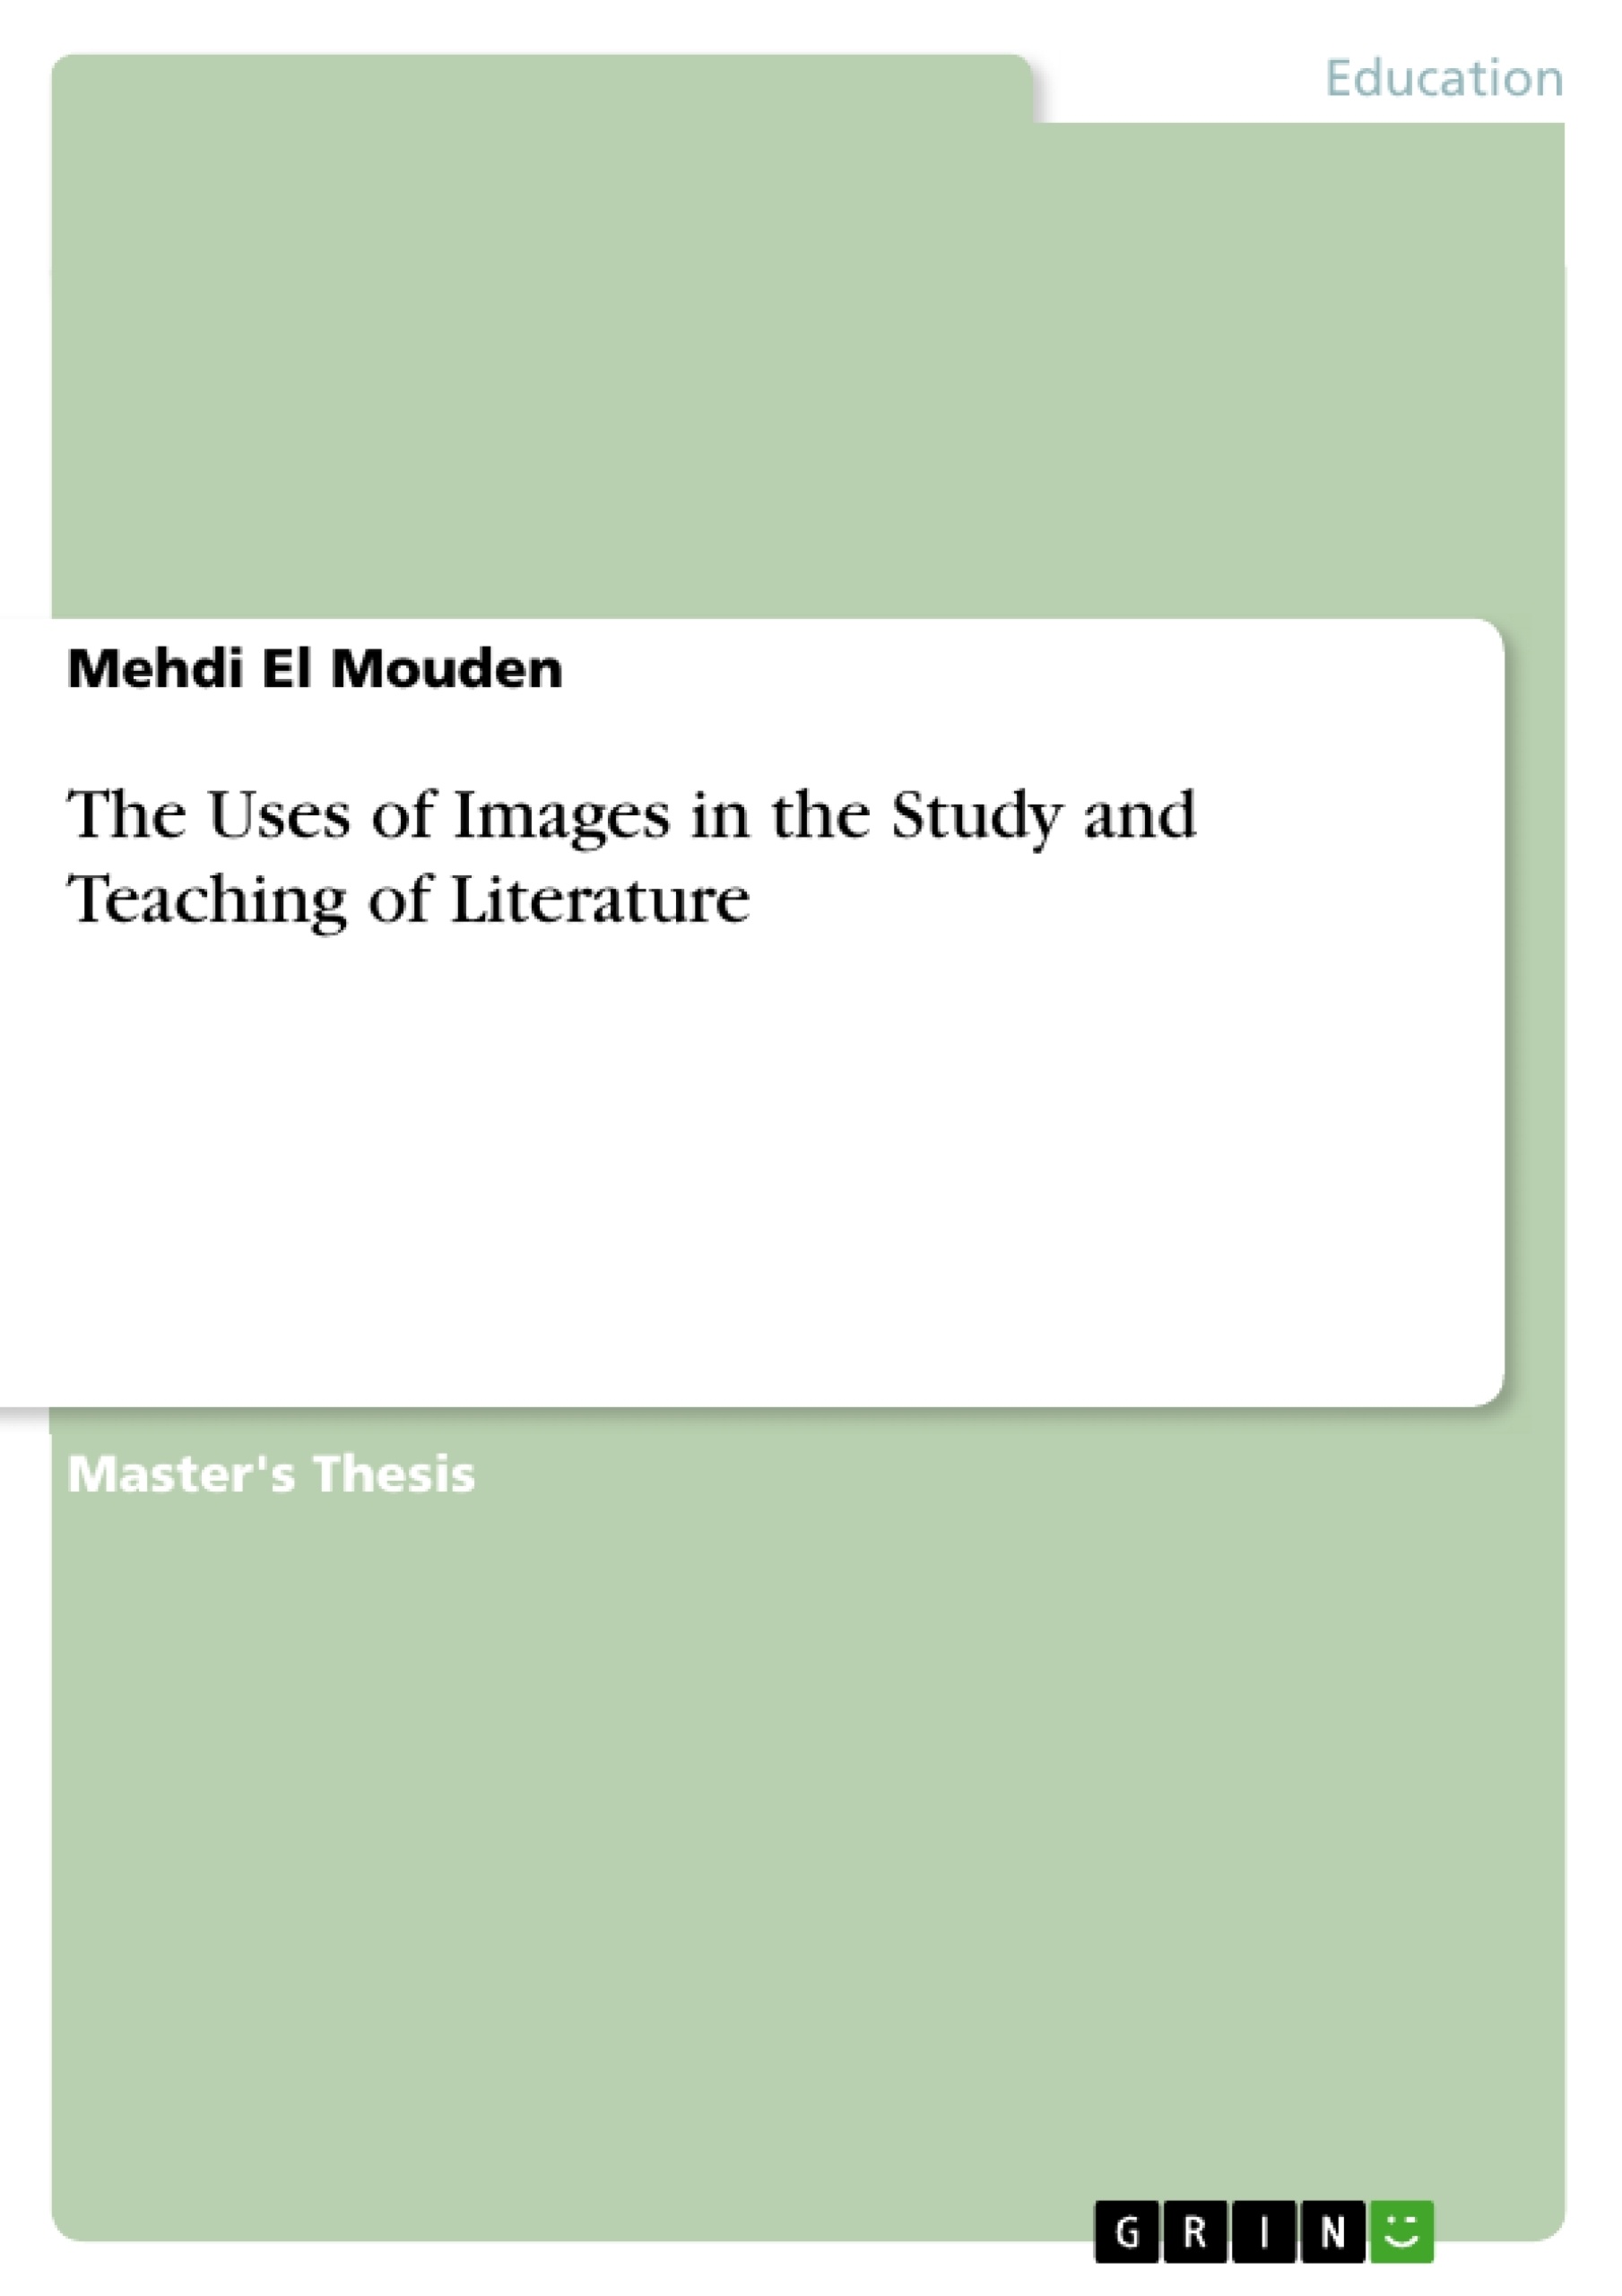 Title: The Uses of Images in the Study and Teaching of Literature